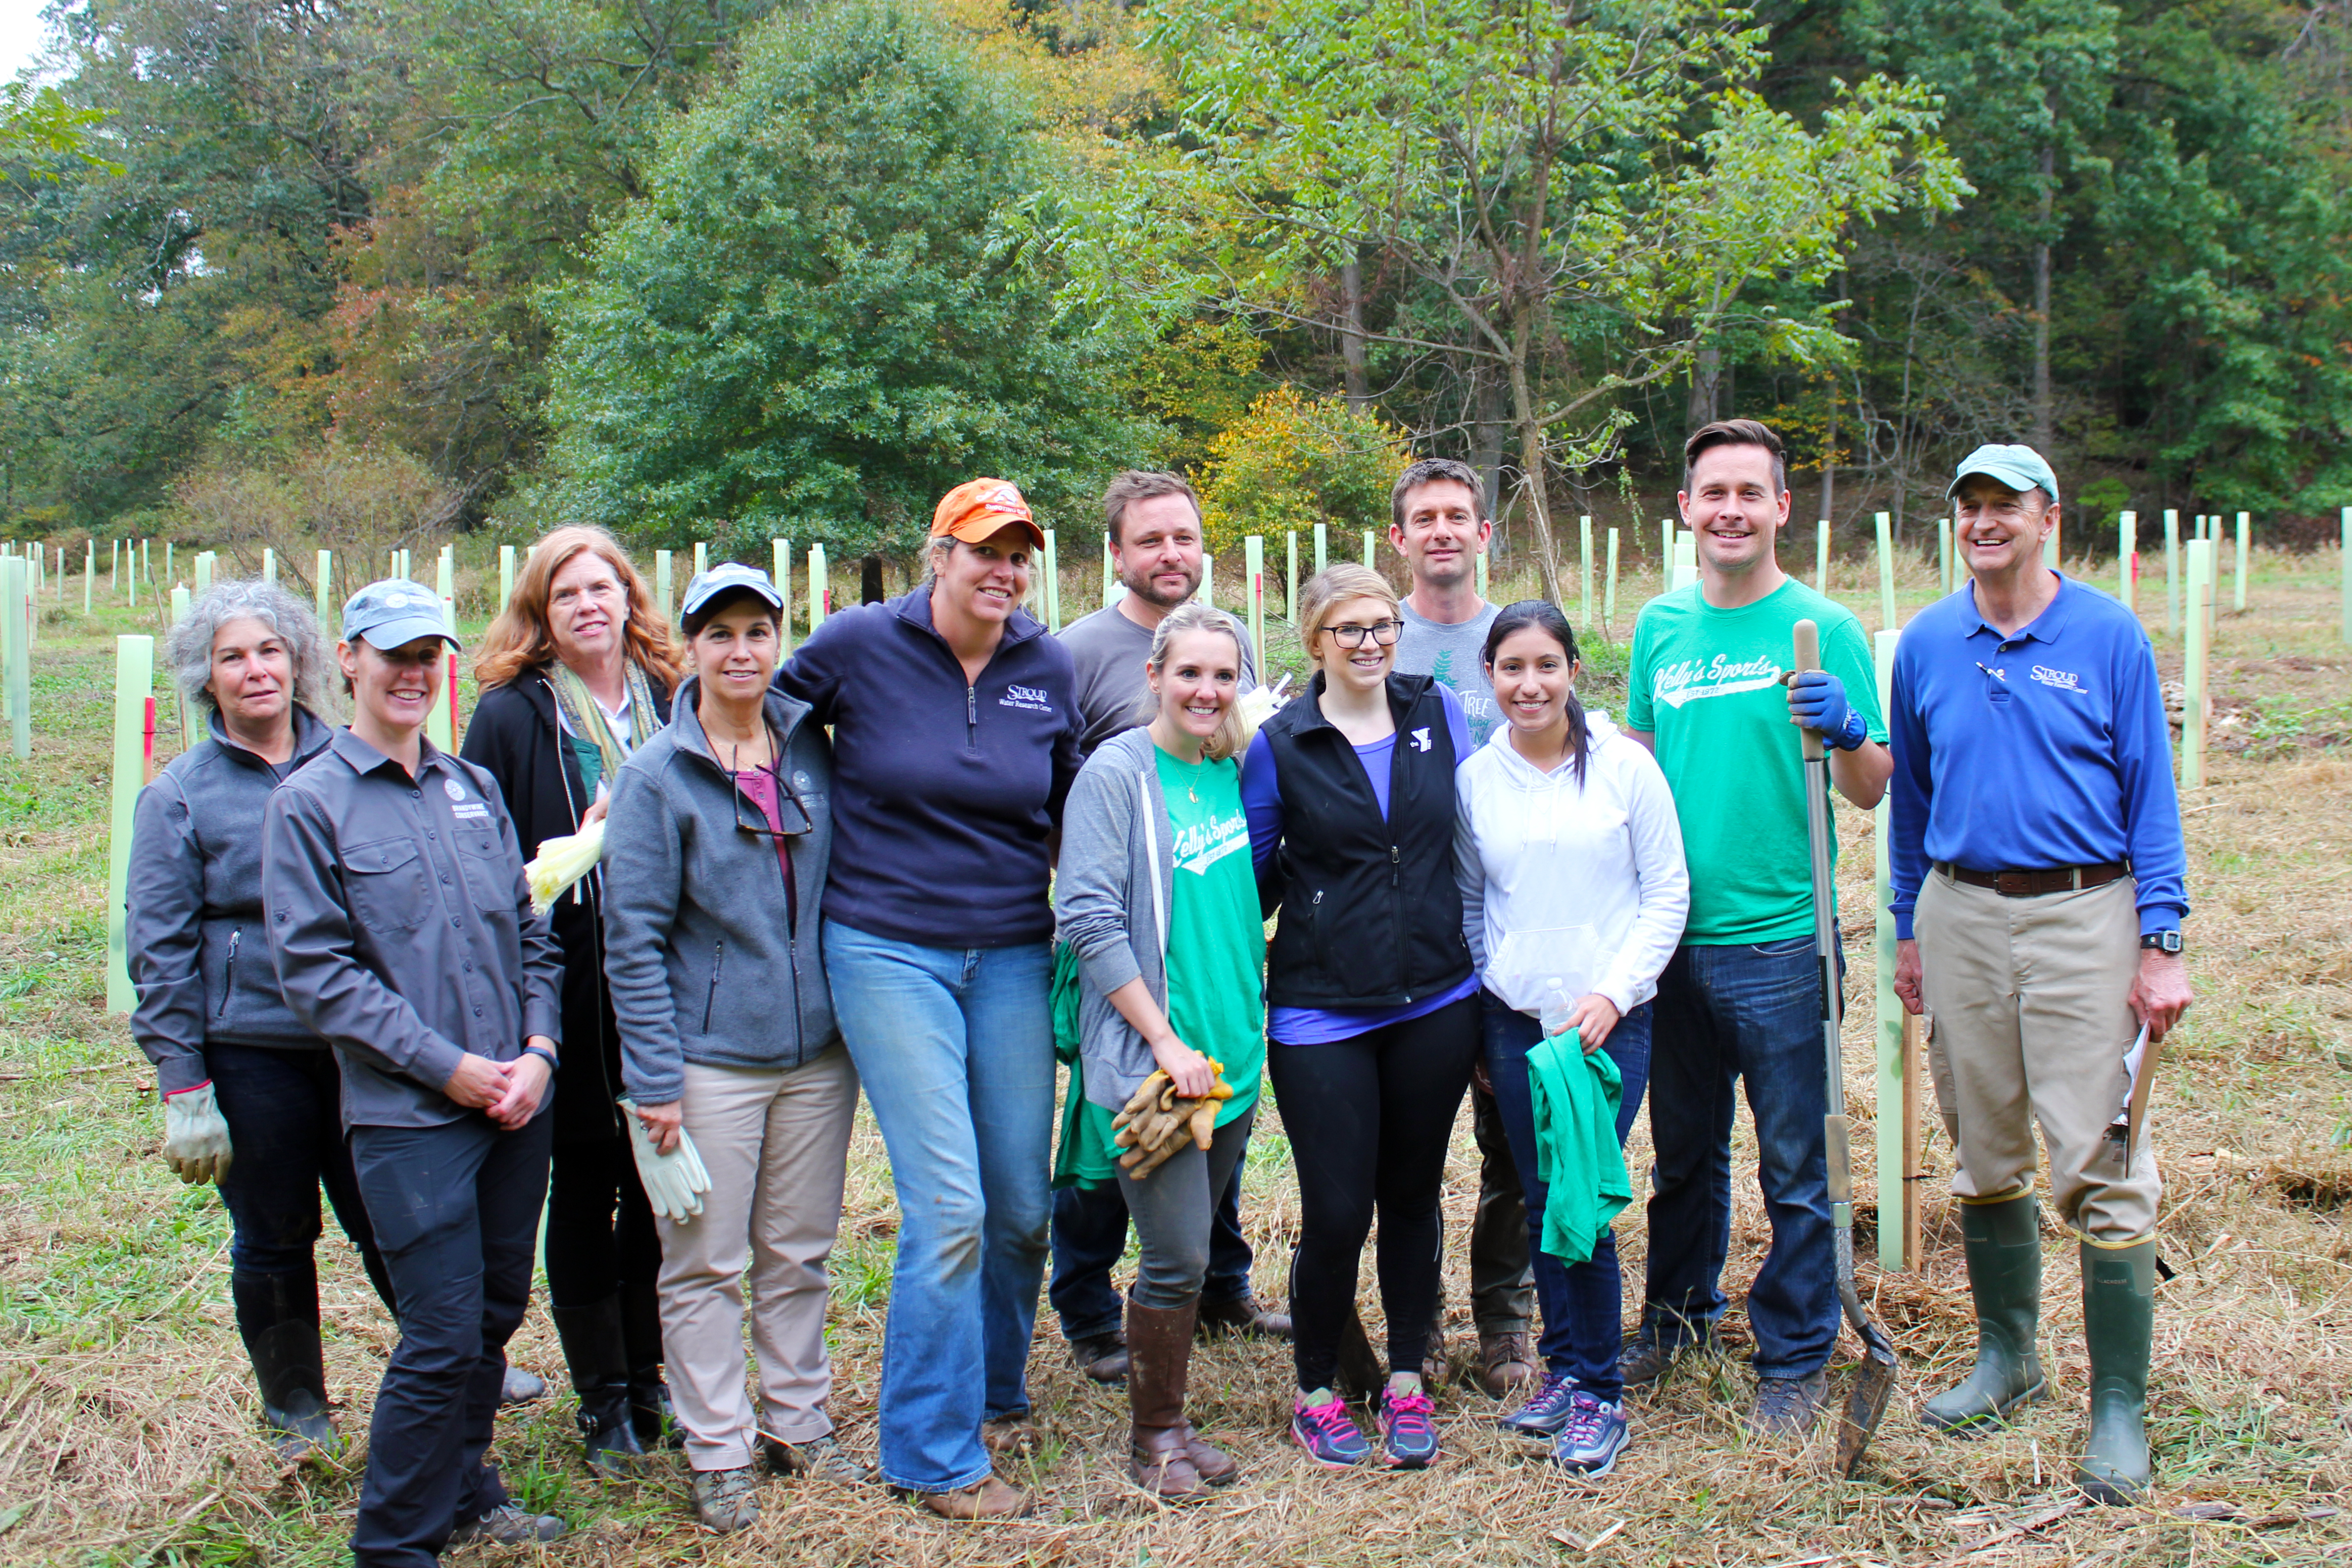 Brandywine Conservancy and Stroud Water Research Center staff and volunteers planted 1,000 trees in joint celebration of 50th anniversaries